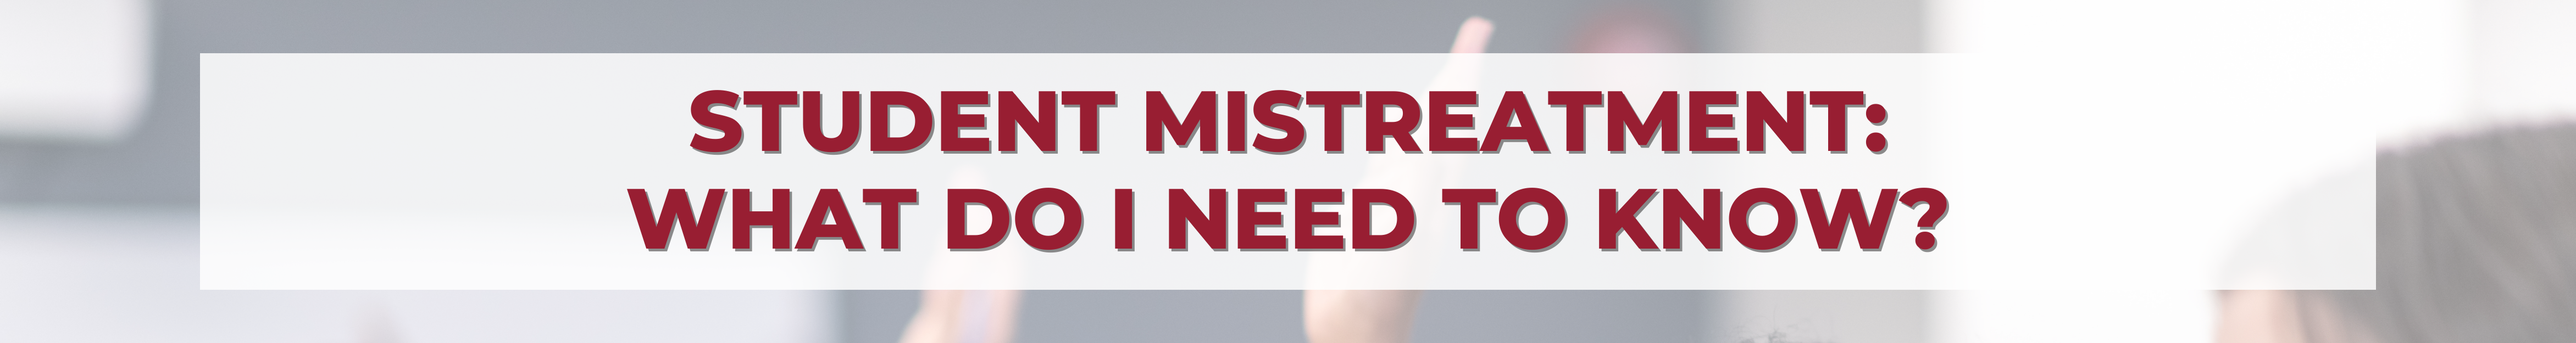 Student Mistreatment in the MD Program: What Do I Need to Know? Banner